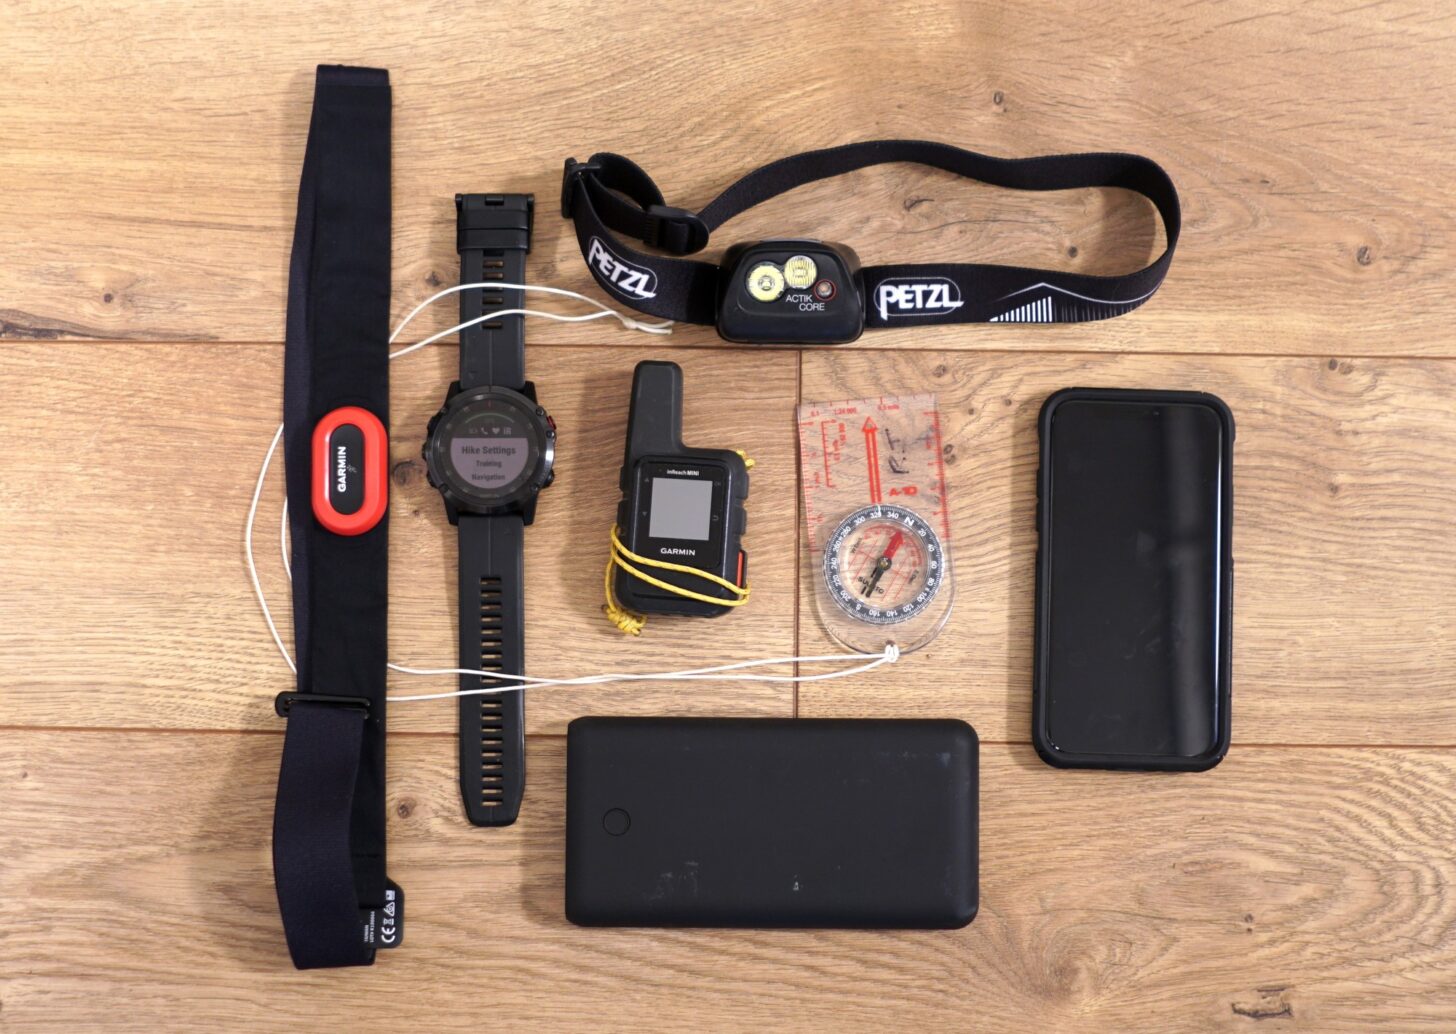 layout of navigation and electronics gear for winter backpacking - a heart rate monitor and fitness watch, satellite communicator, headlamp, compass, smartphone, and power bank